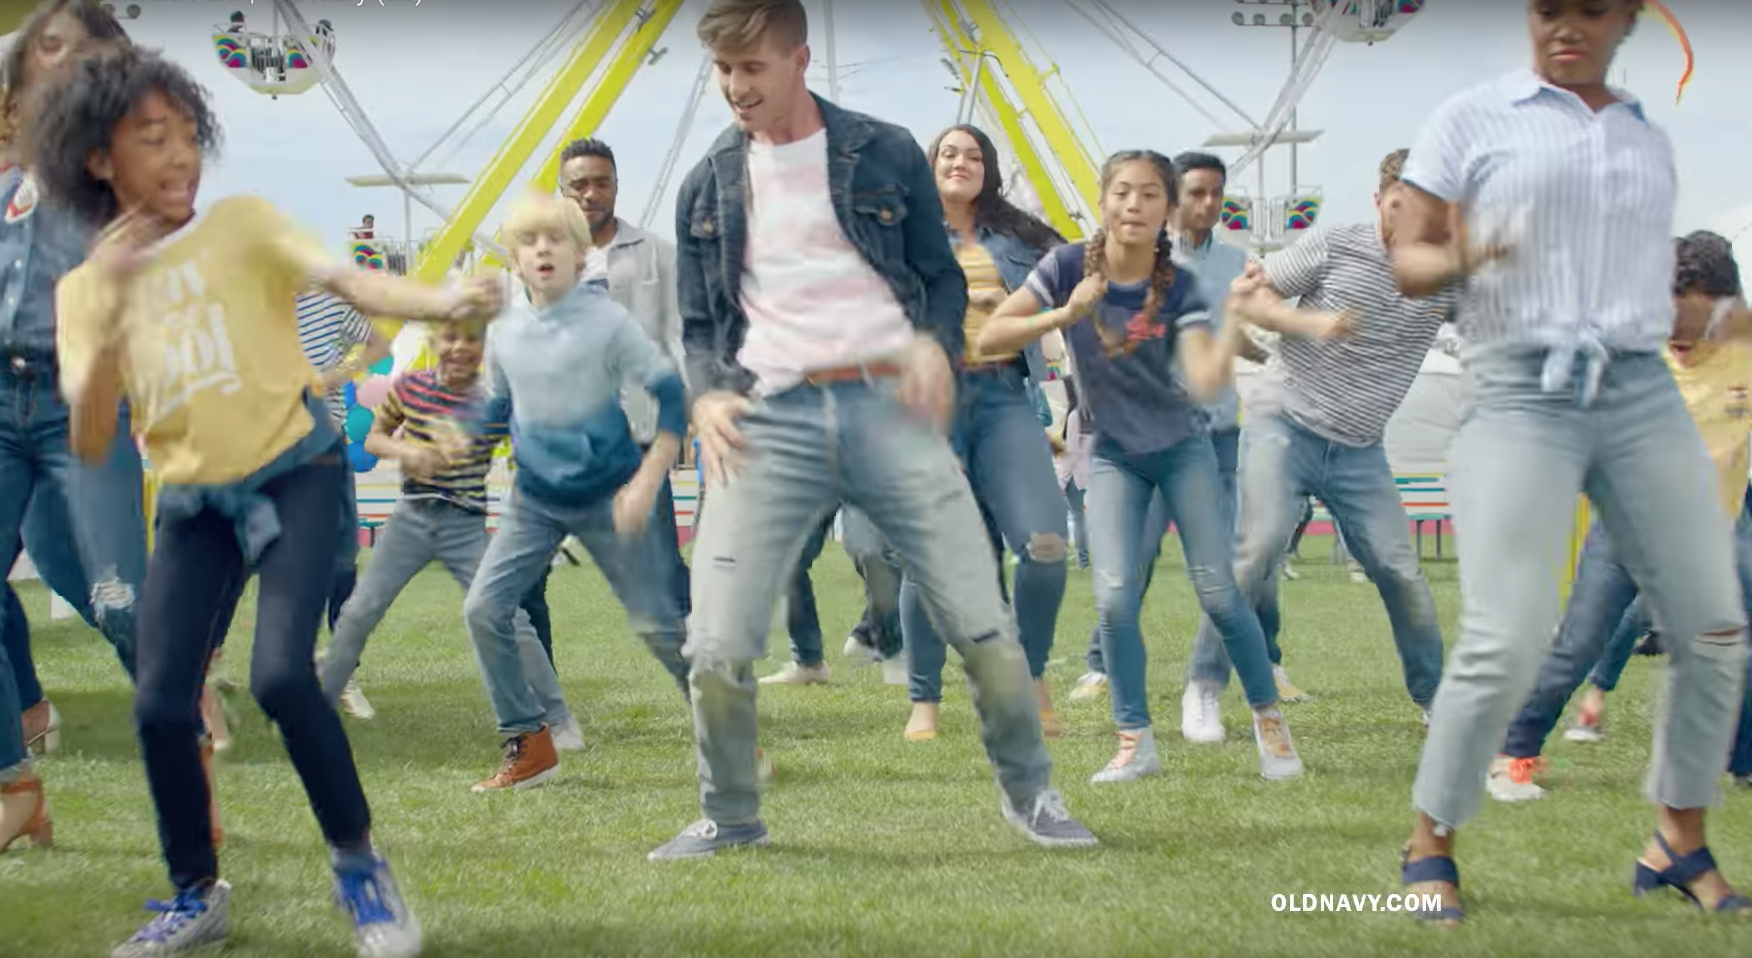 old navy jean commercial